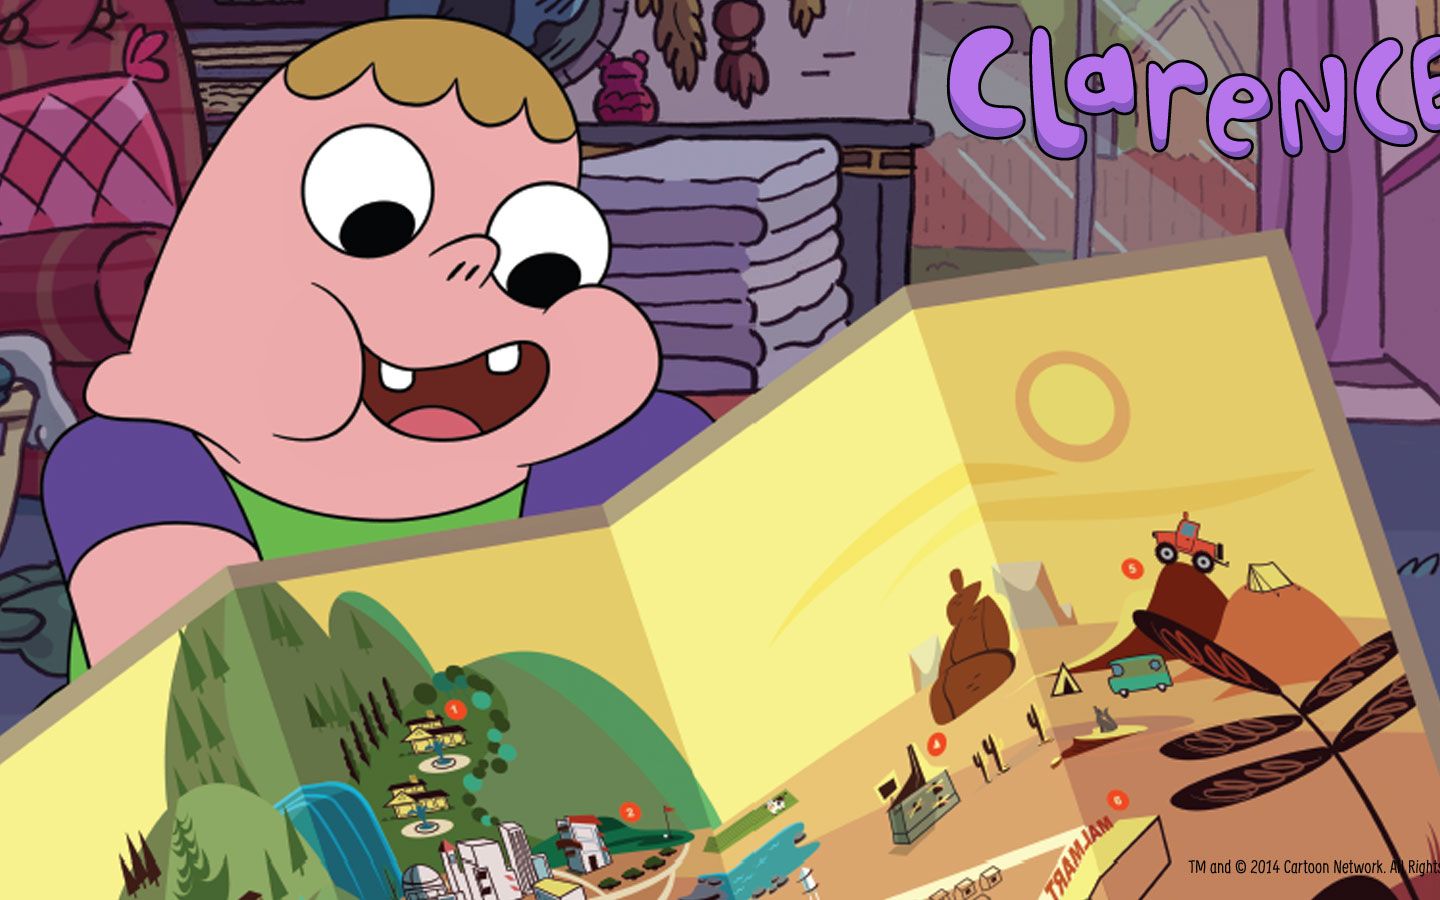 Clarence Caricatura Wallpapers